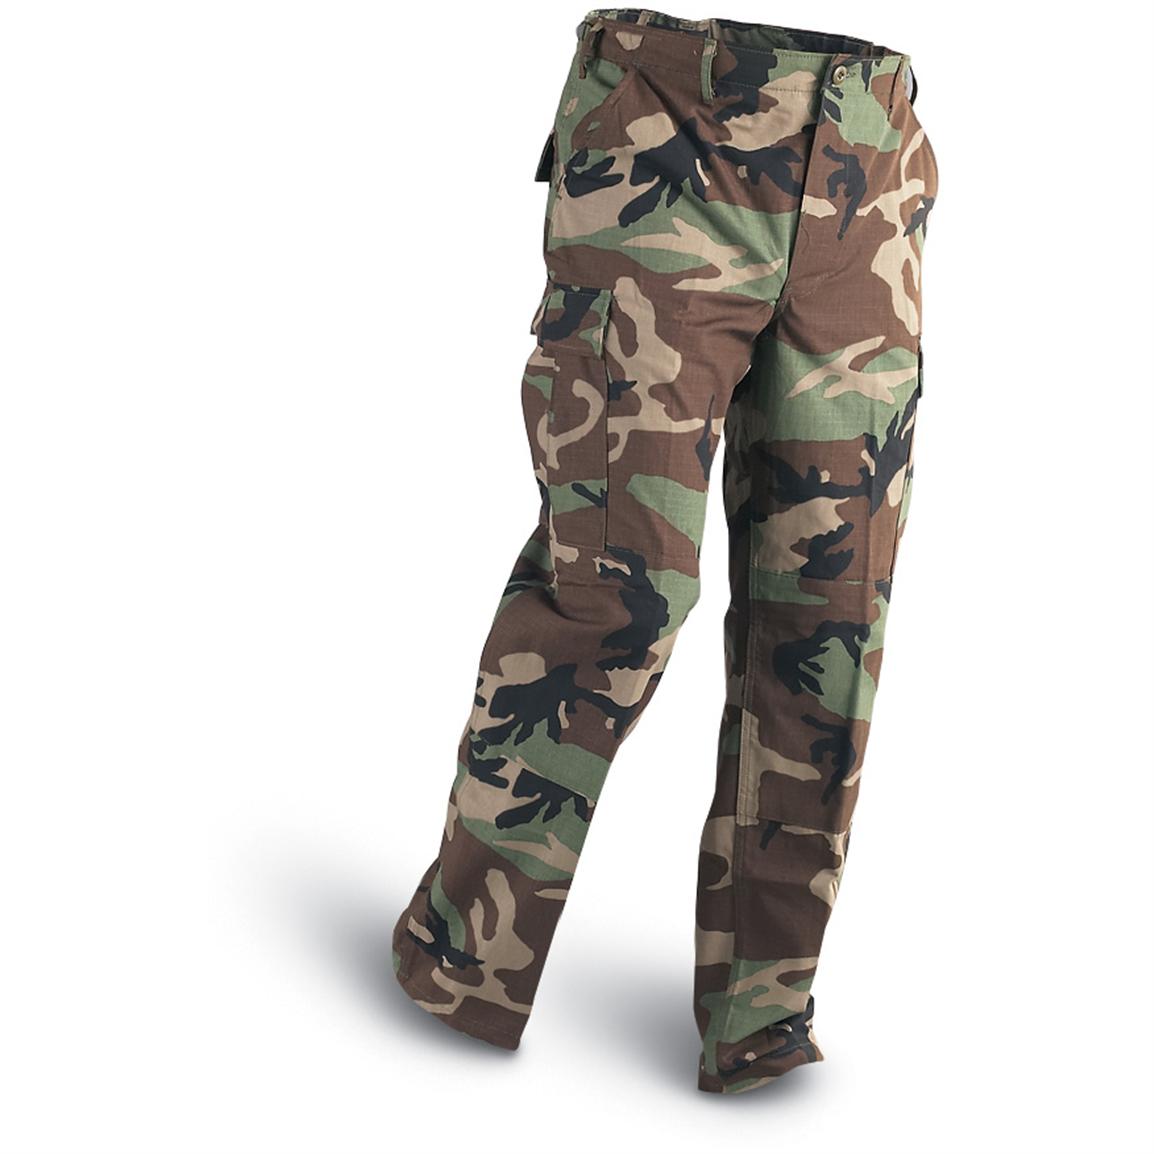 Tru Spec® Nyco Bdu Pants Woodland 135244 Pants At Sportsmans Guide 